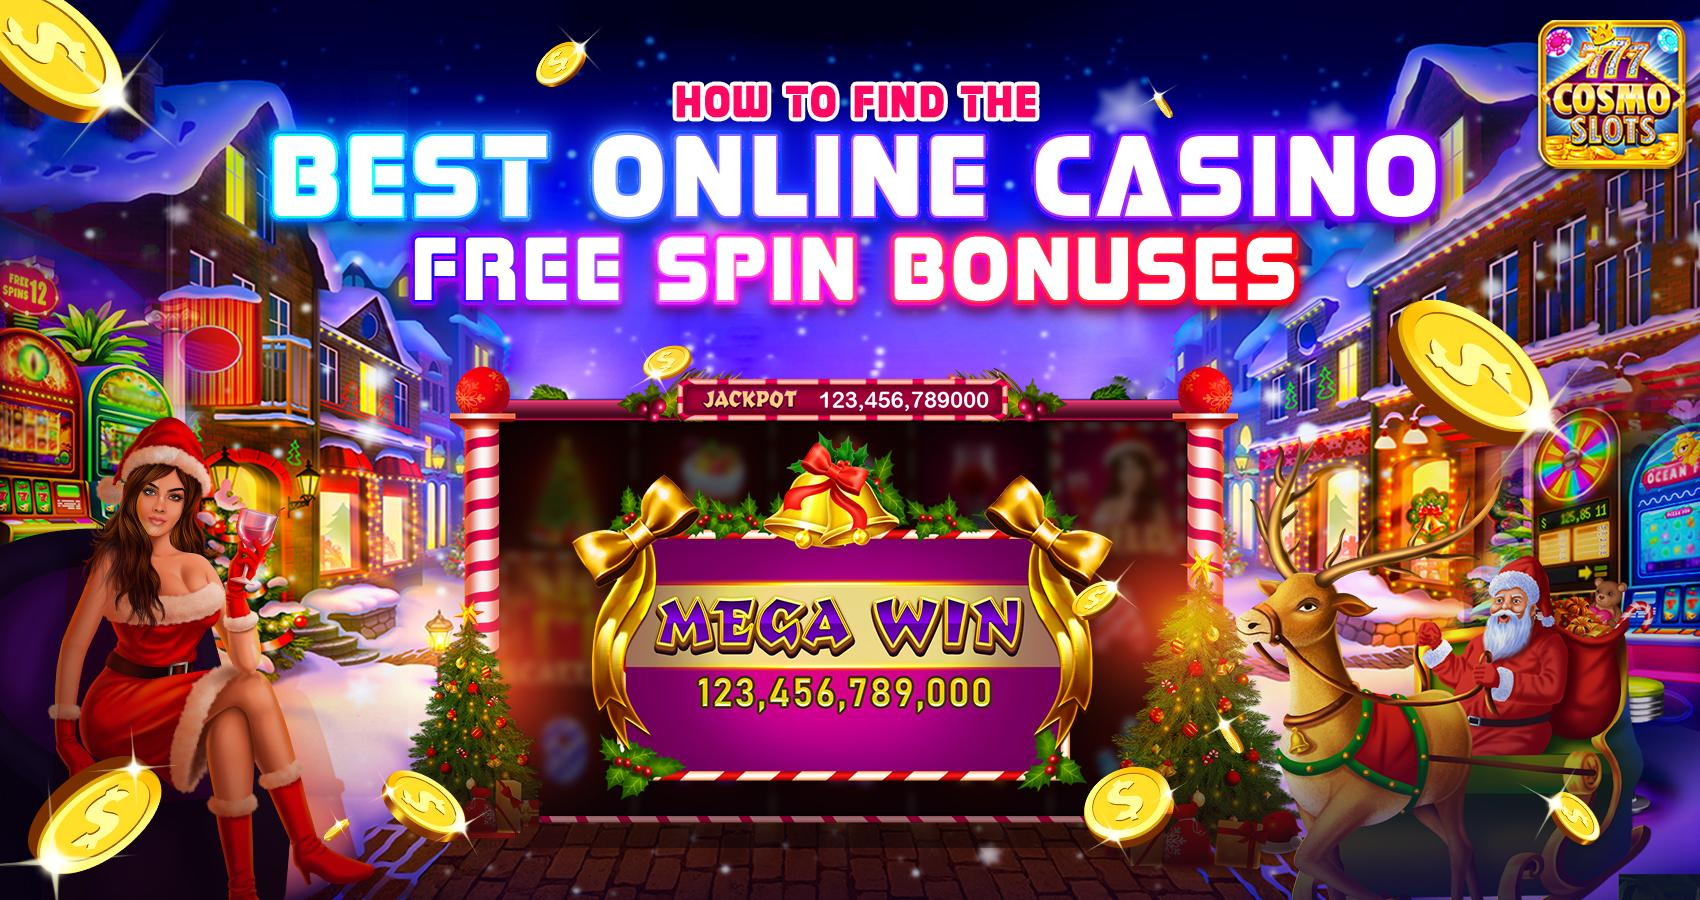 How to Find the Best Online Casino Free Spin Bonuses